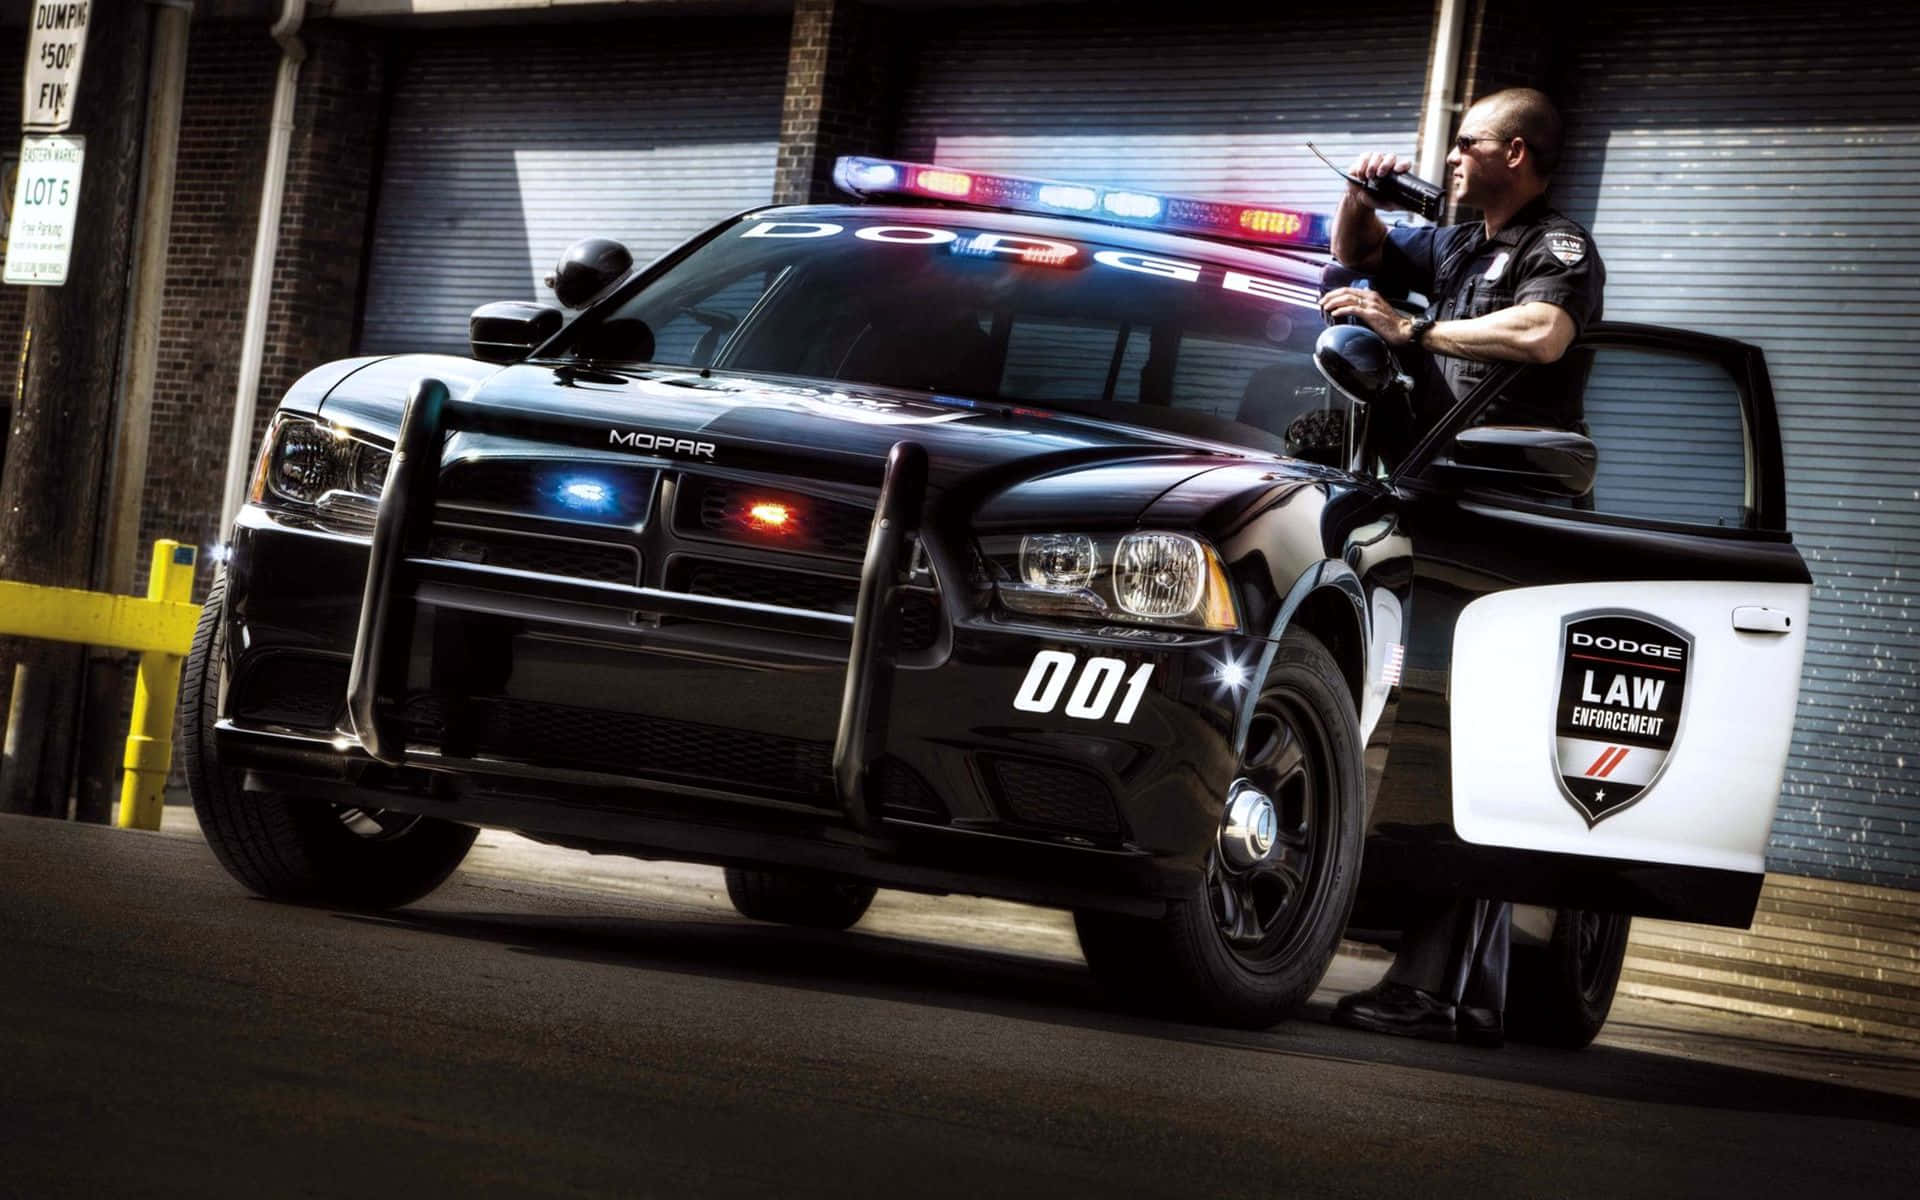 police wallpaper backgrounds